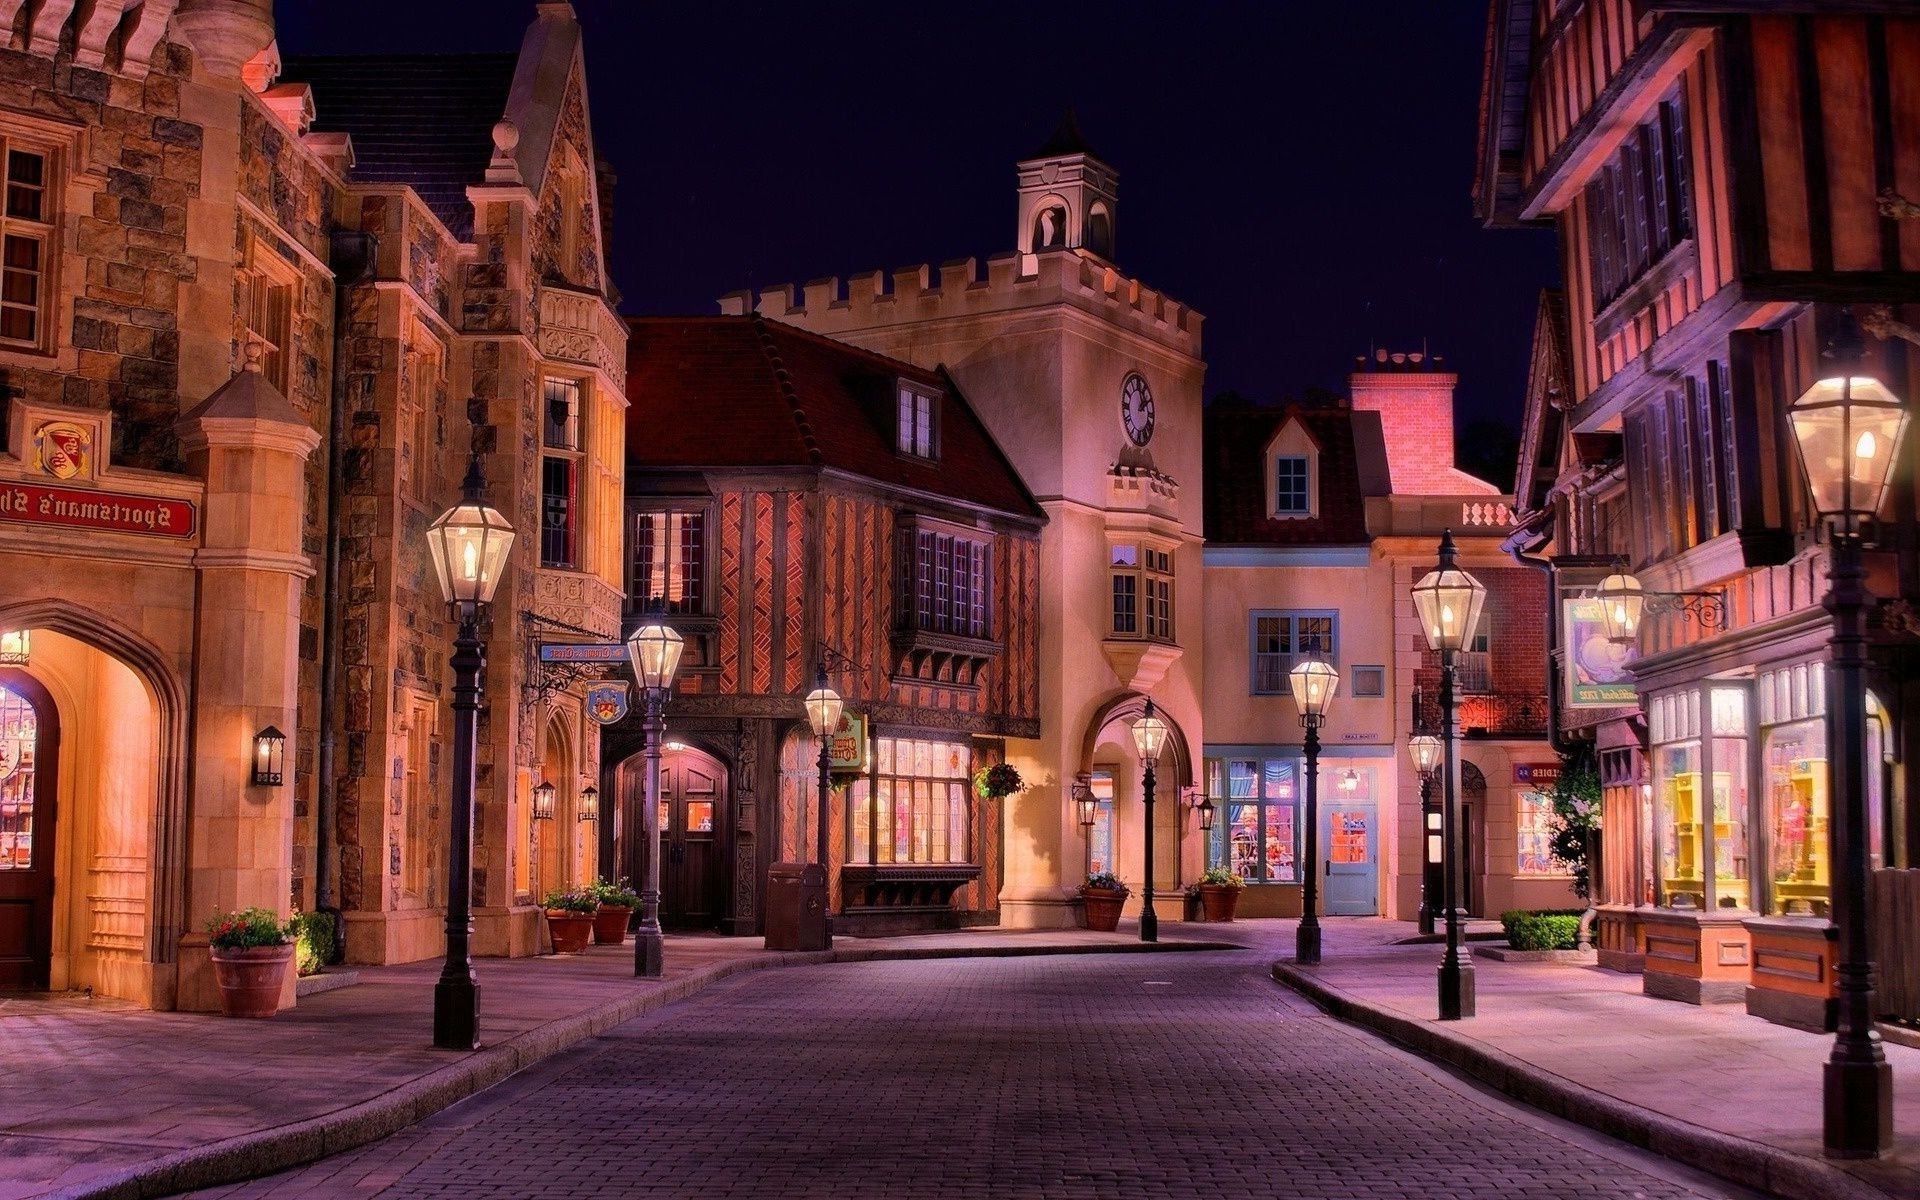 ancient architecture architecture travel city street outdoors evening dusk building illuminated town